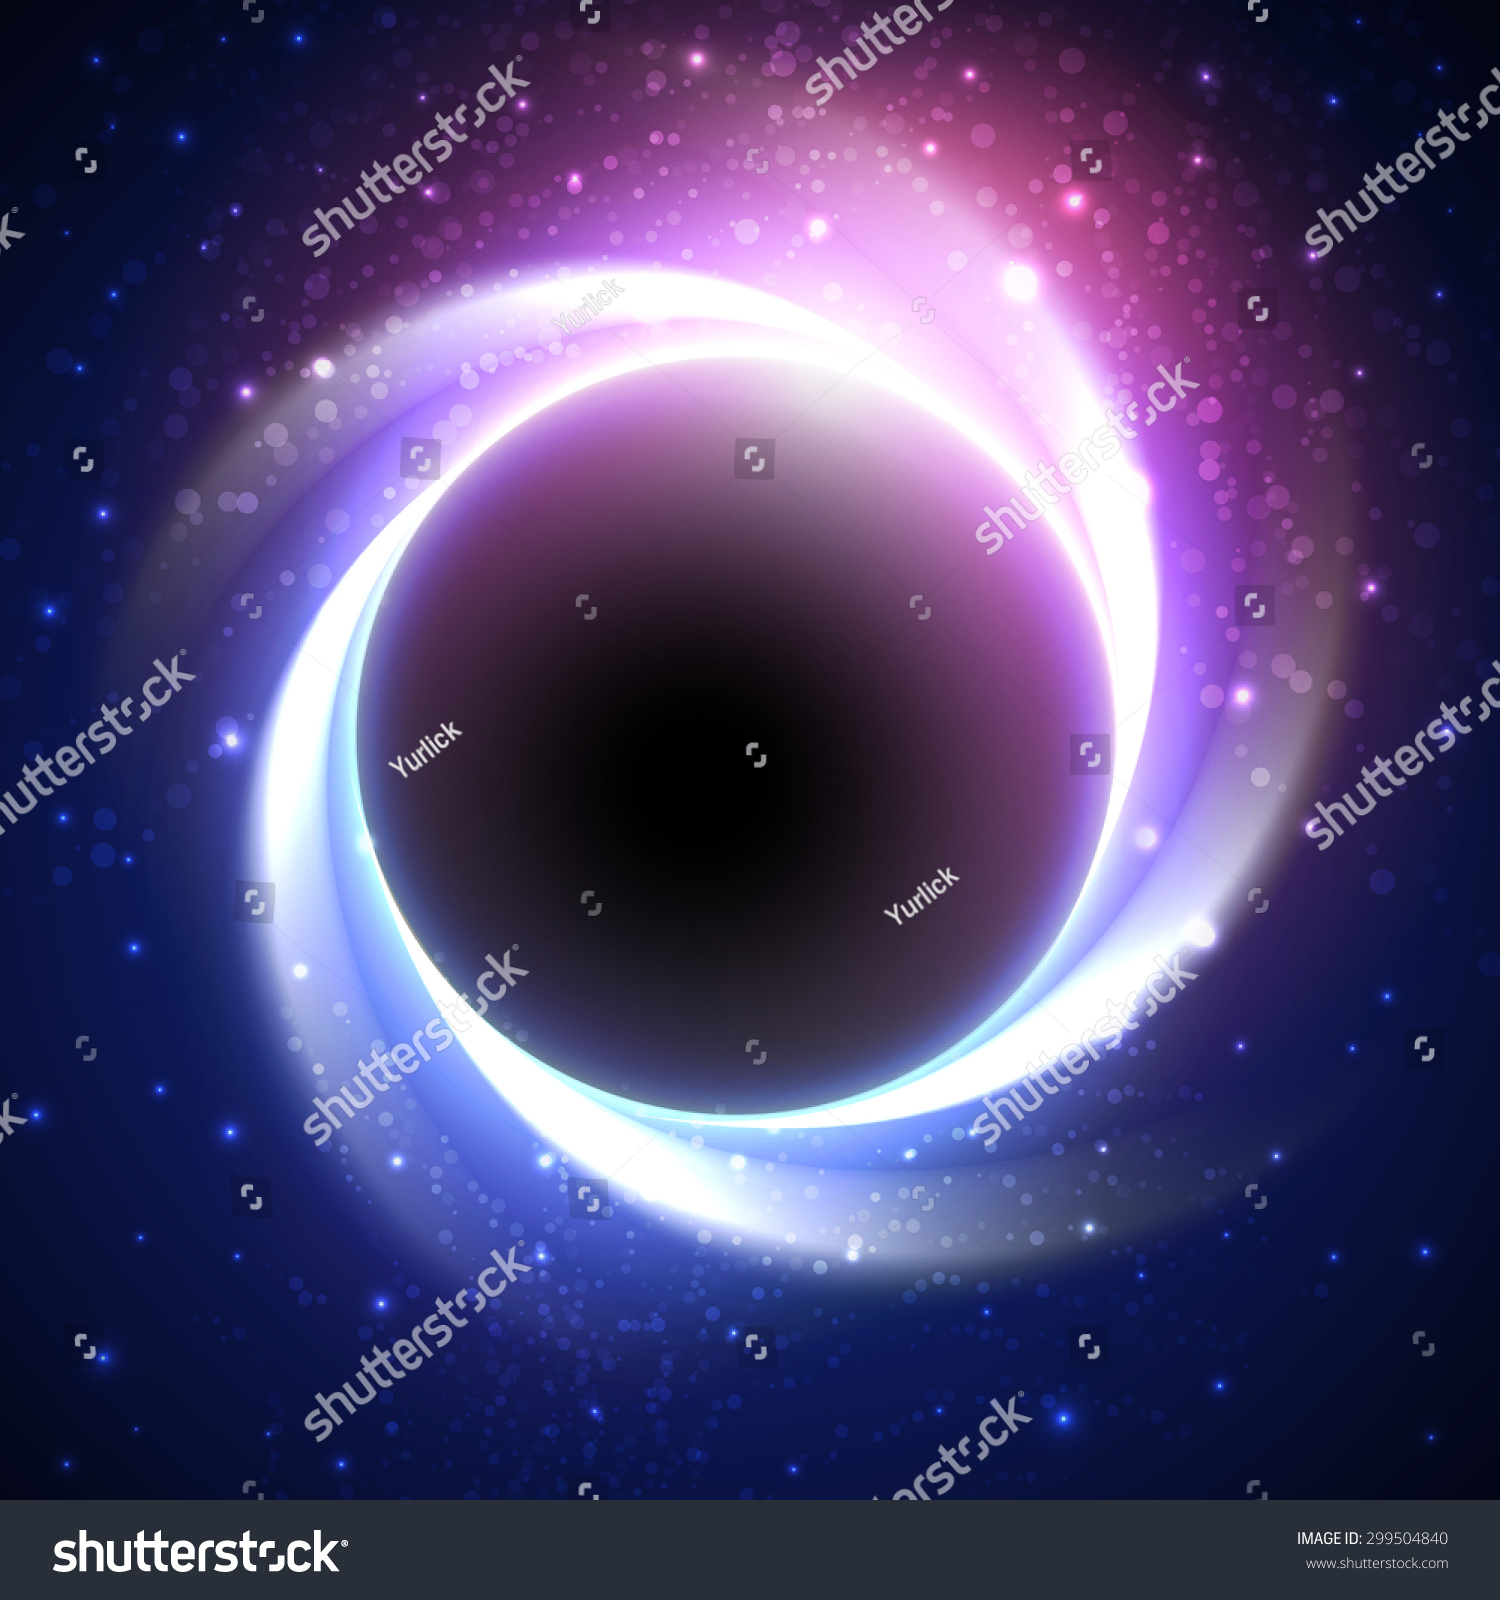 Beautiful Eclipse In A Distant Galaxy. Starry Sky With Dark Planet At ...